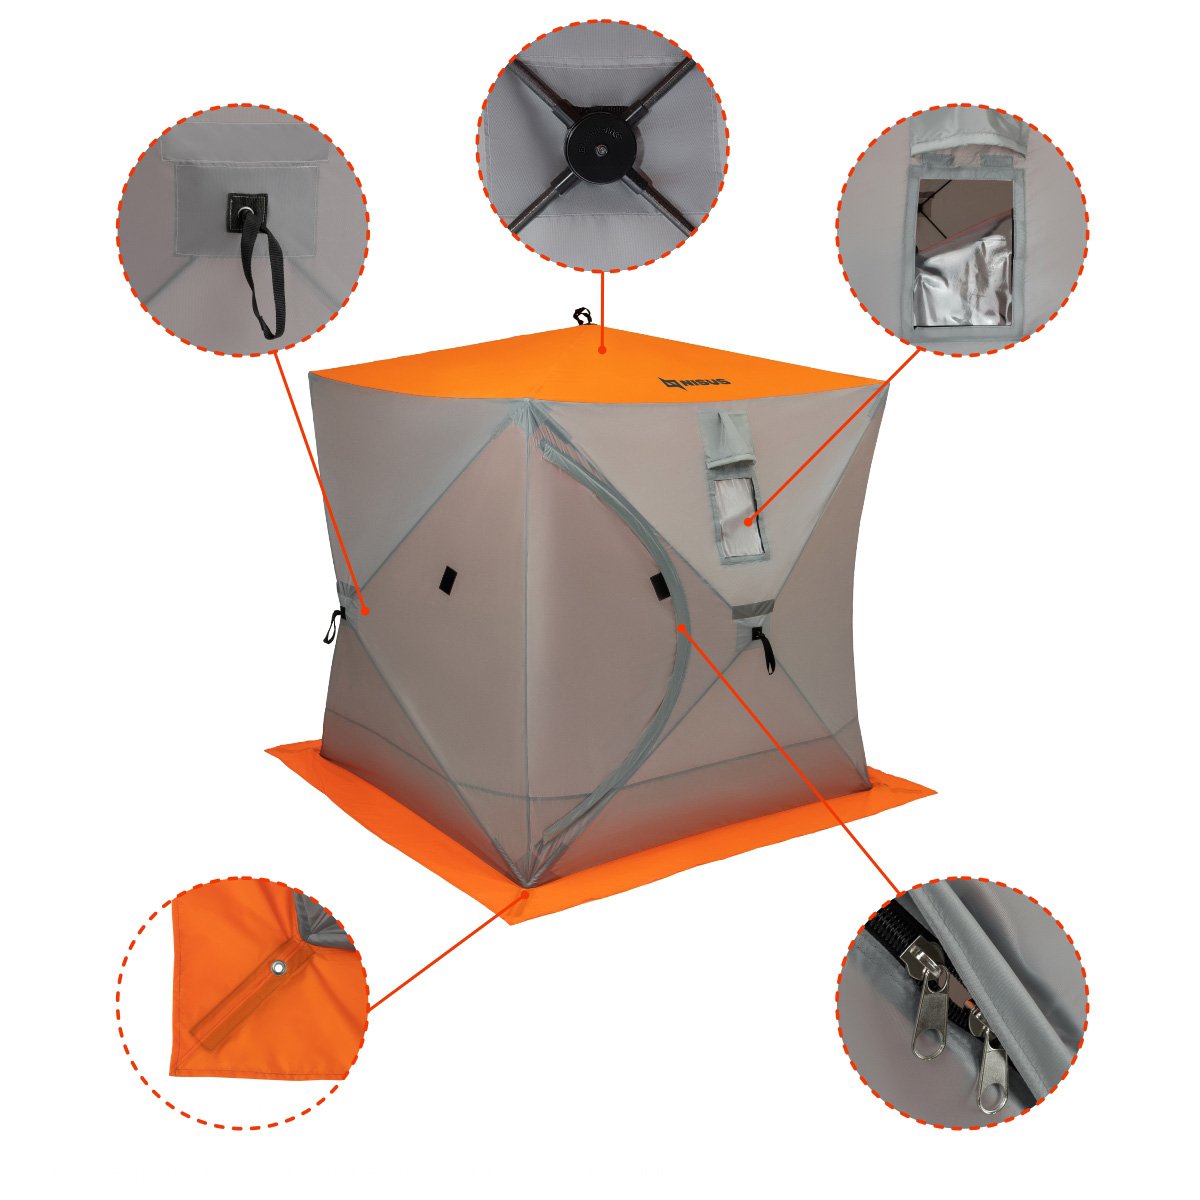 Cube Large Ice Fishing 3 Person Shelter is equipped with an extra wide protective skirt with apertures for ice anchors to fix the shelter, windows for ventilation, solid fiberglass frameand zippers to widely open/close the shelter